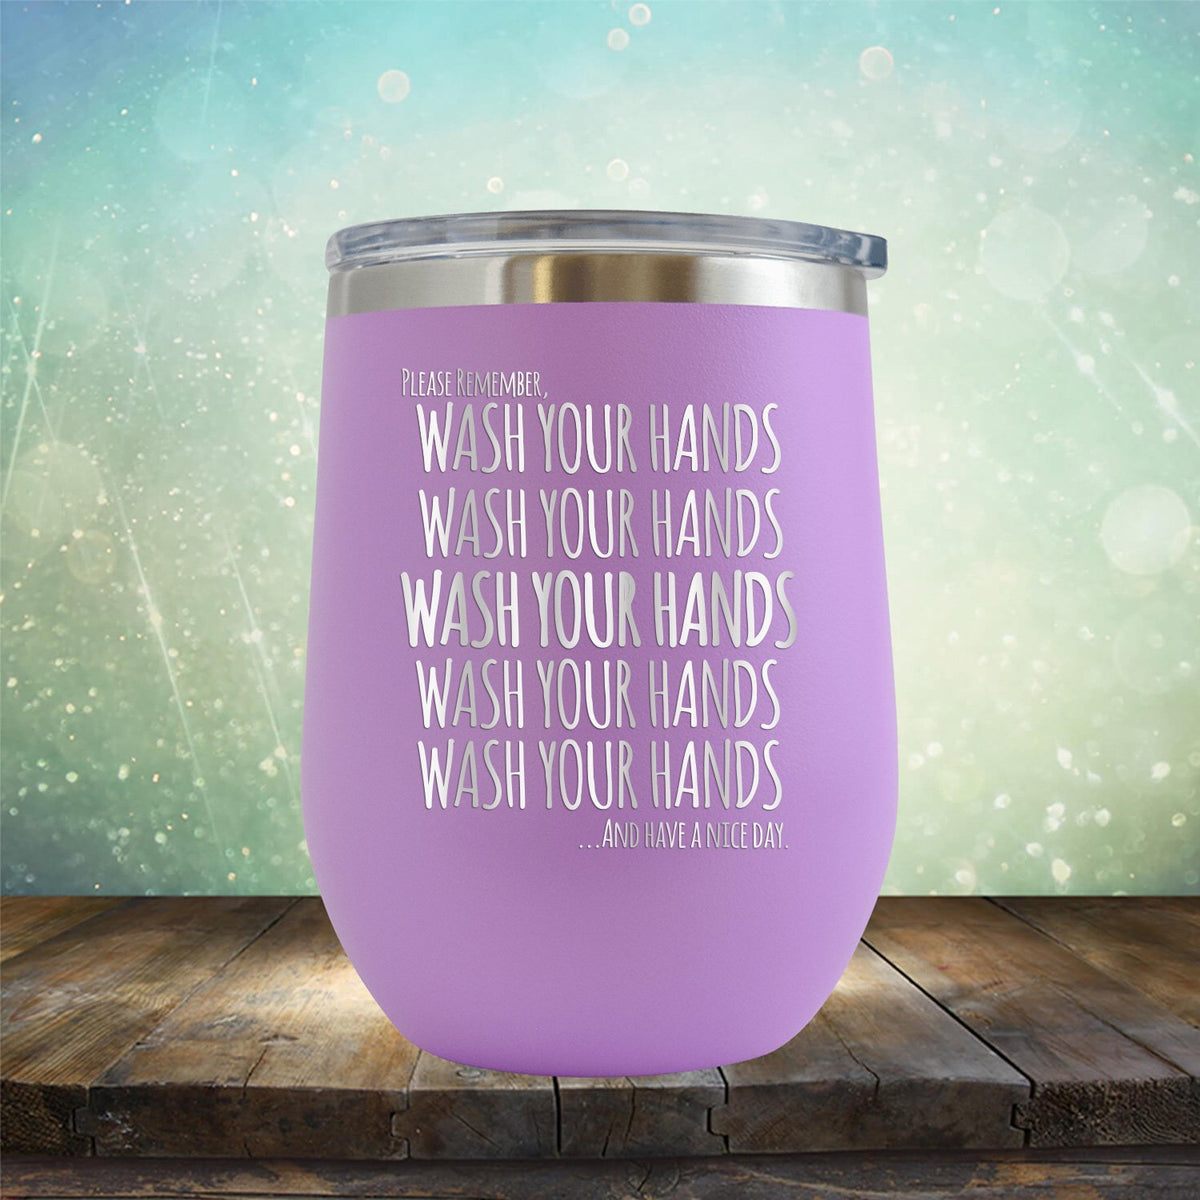 Wash Your Hands and Have A Nice Day - Stemless Wine Cup